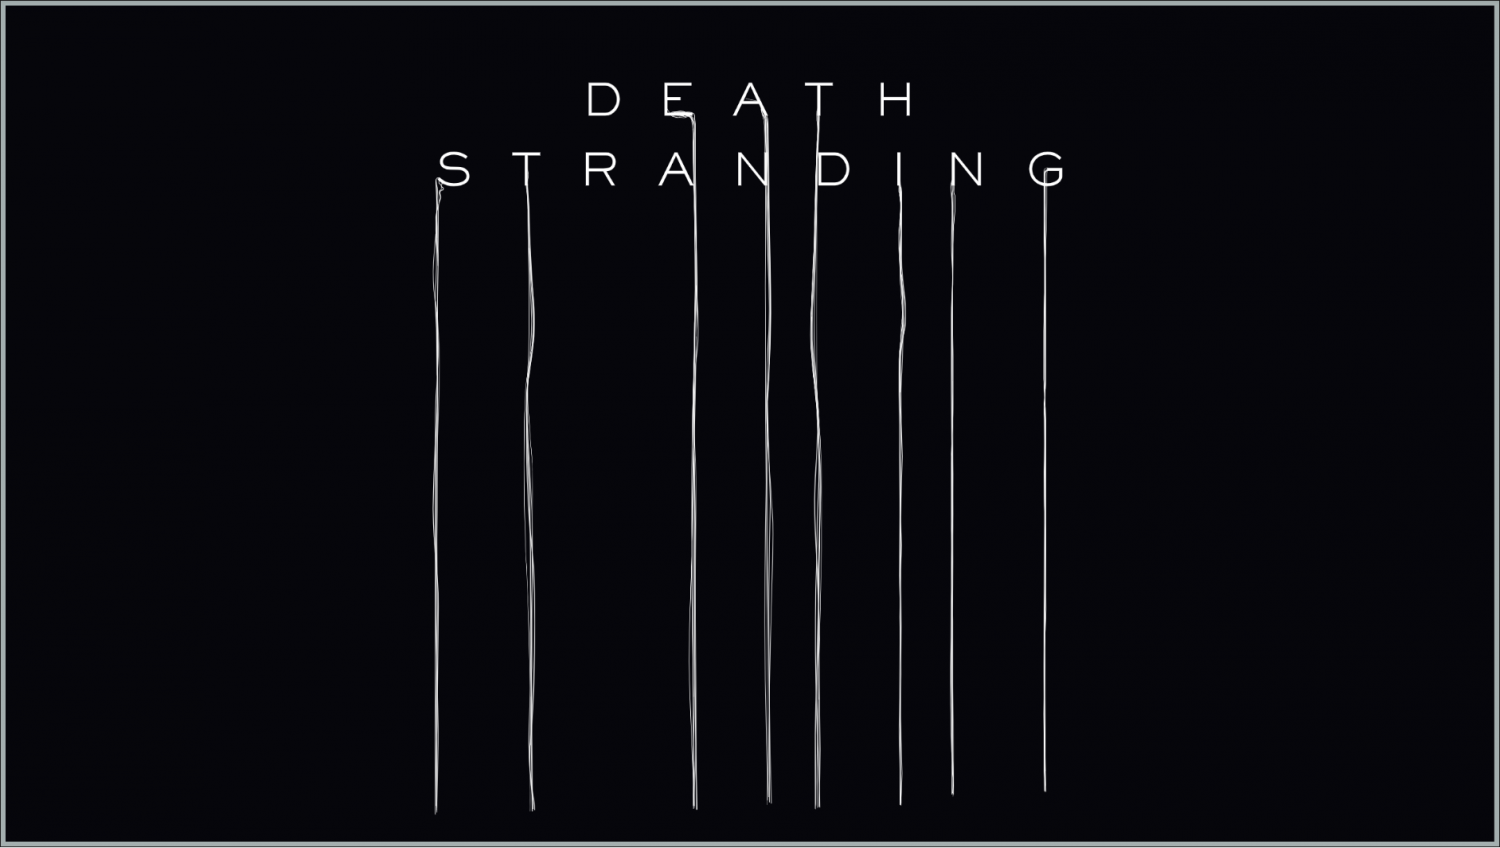 DEATH STRANDING For PC Out Now, Featuring NVIDIA DLSS 2.0 For Fast, Max  Setting Gameplay, GeForce News